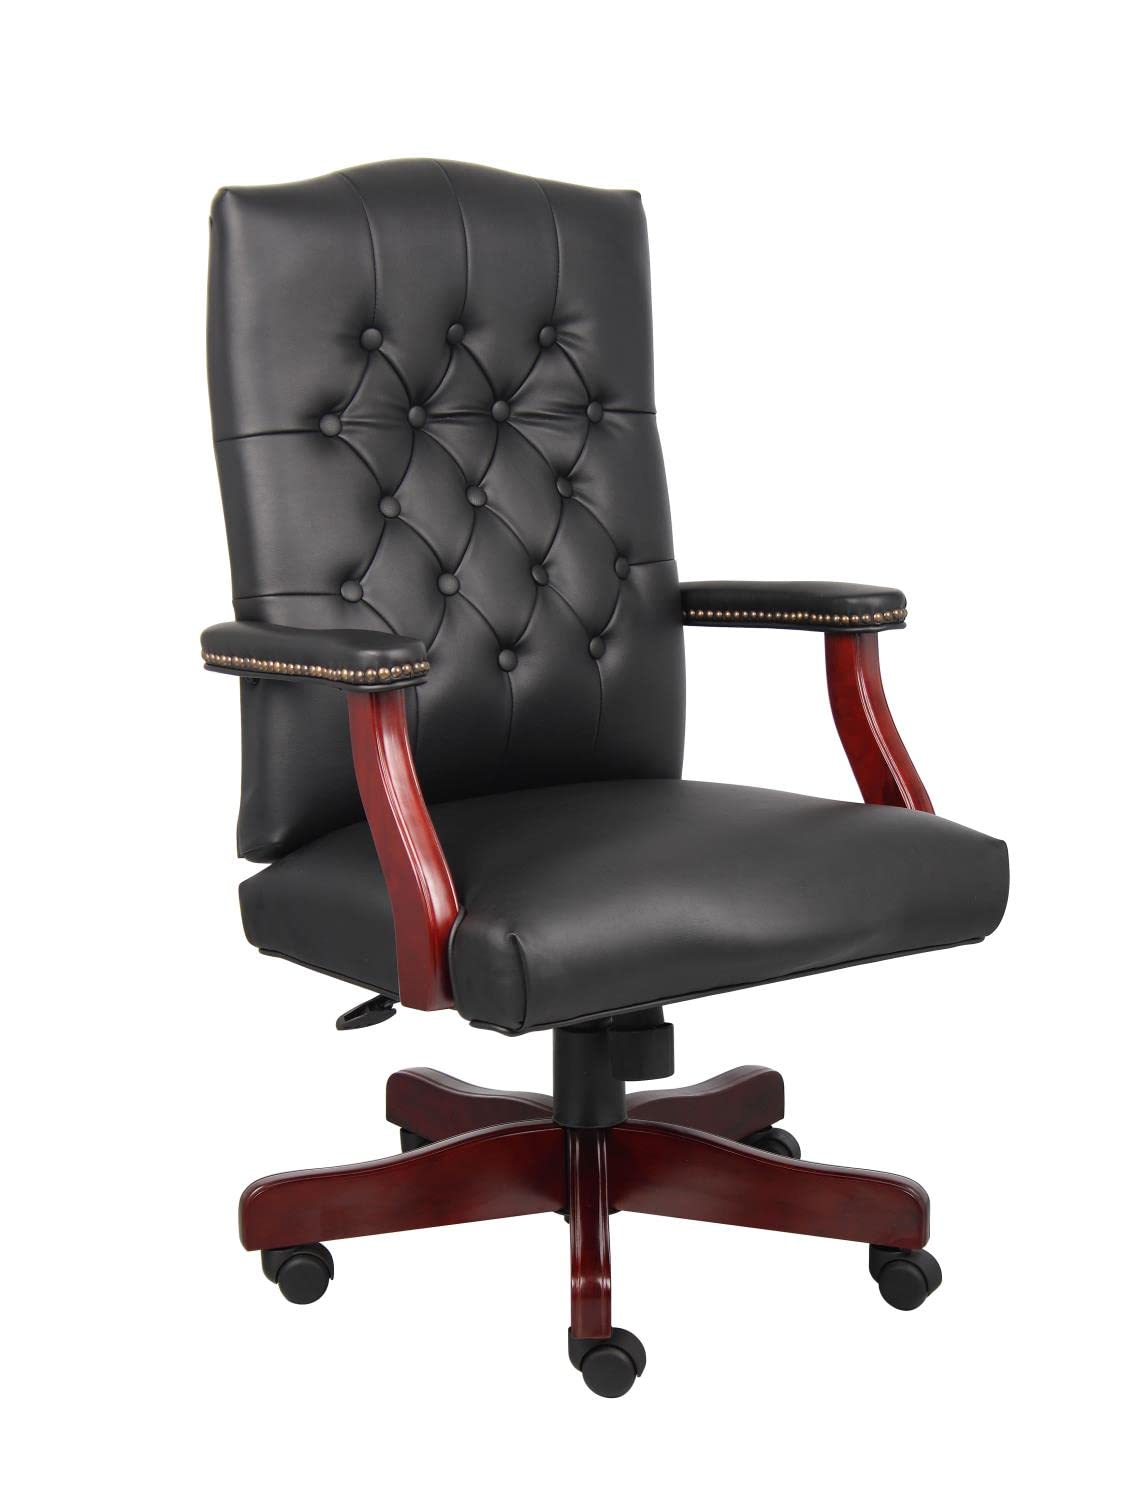 Boss Office Products Офисные товары Classic Executive C...